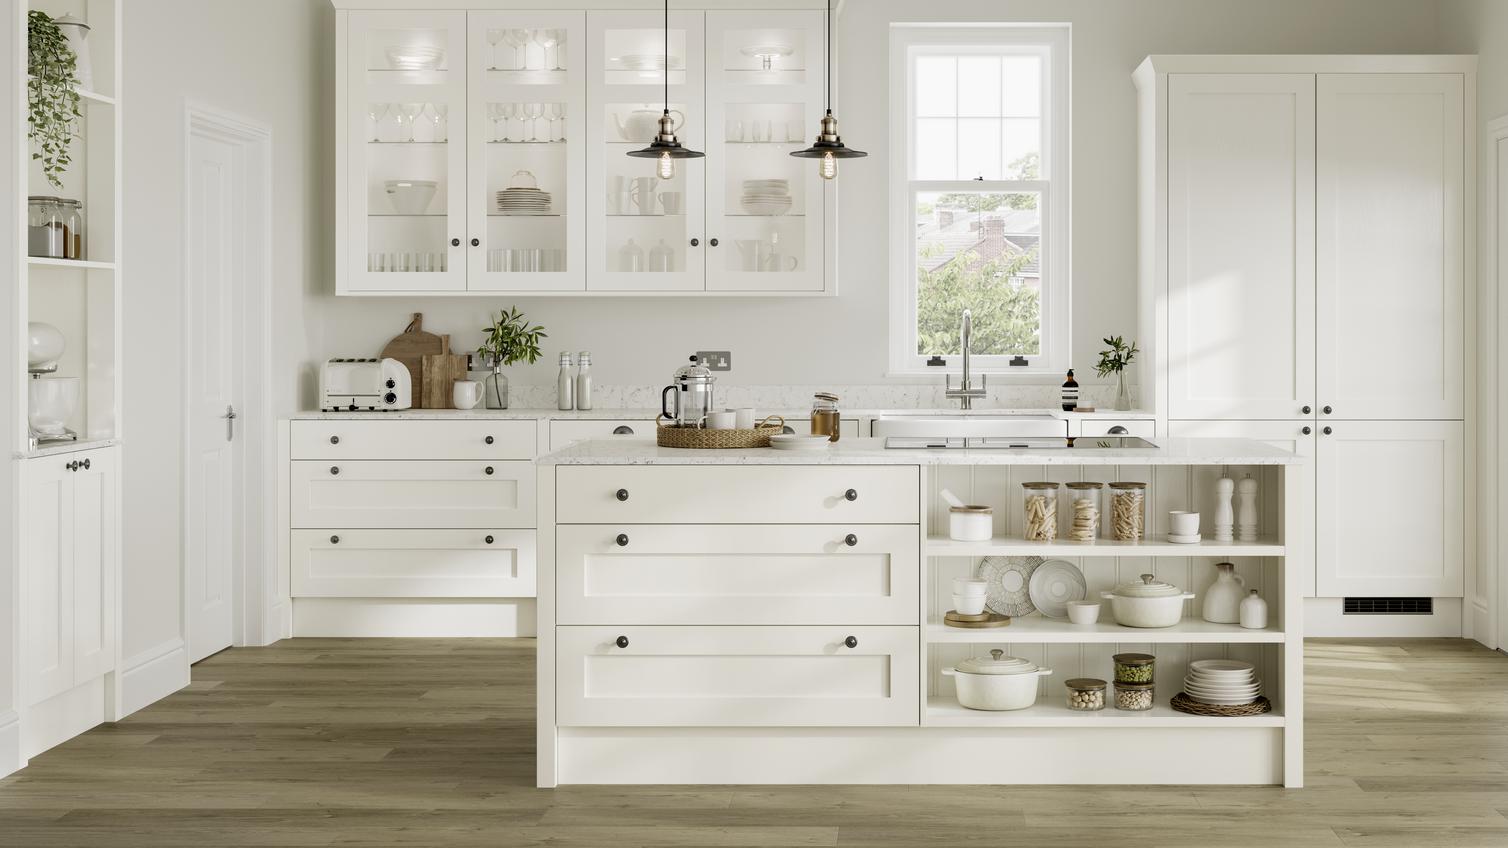 White shaker kitchen idea with island in open-plan layout. Has open shelving, clear glass wall units, and black knob handles.